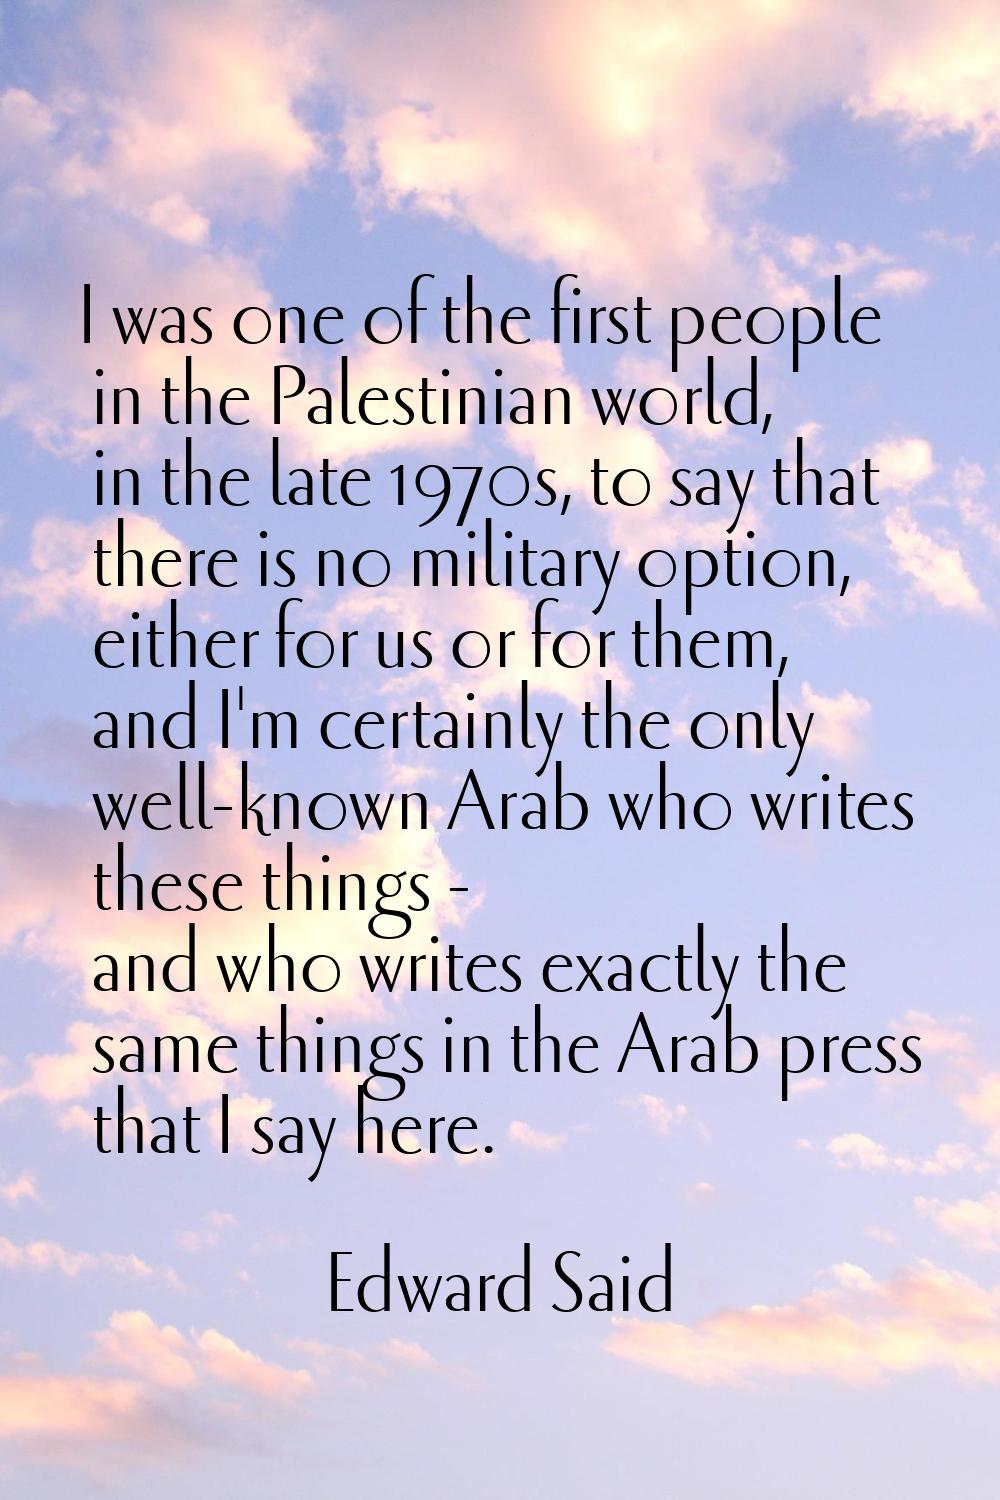 I was one of the first people in the Palestinian world, in the late 1970s, to say that there is no 